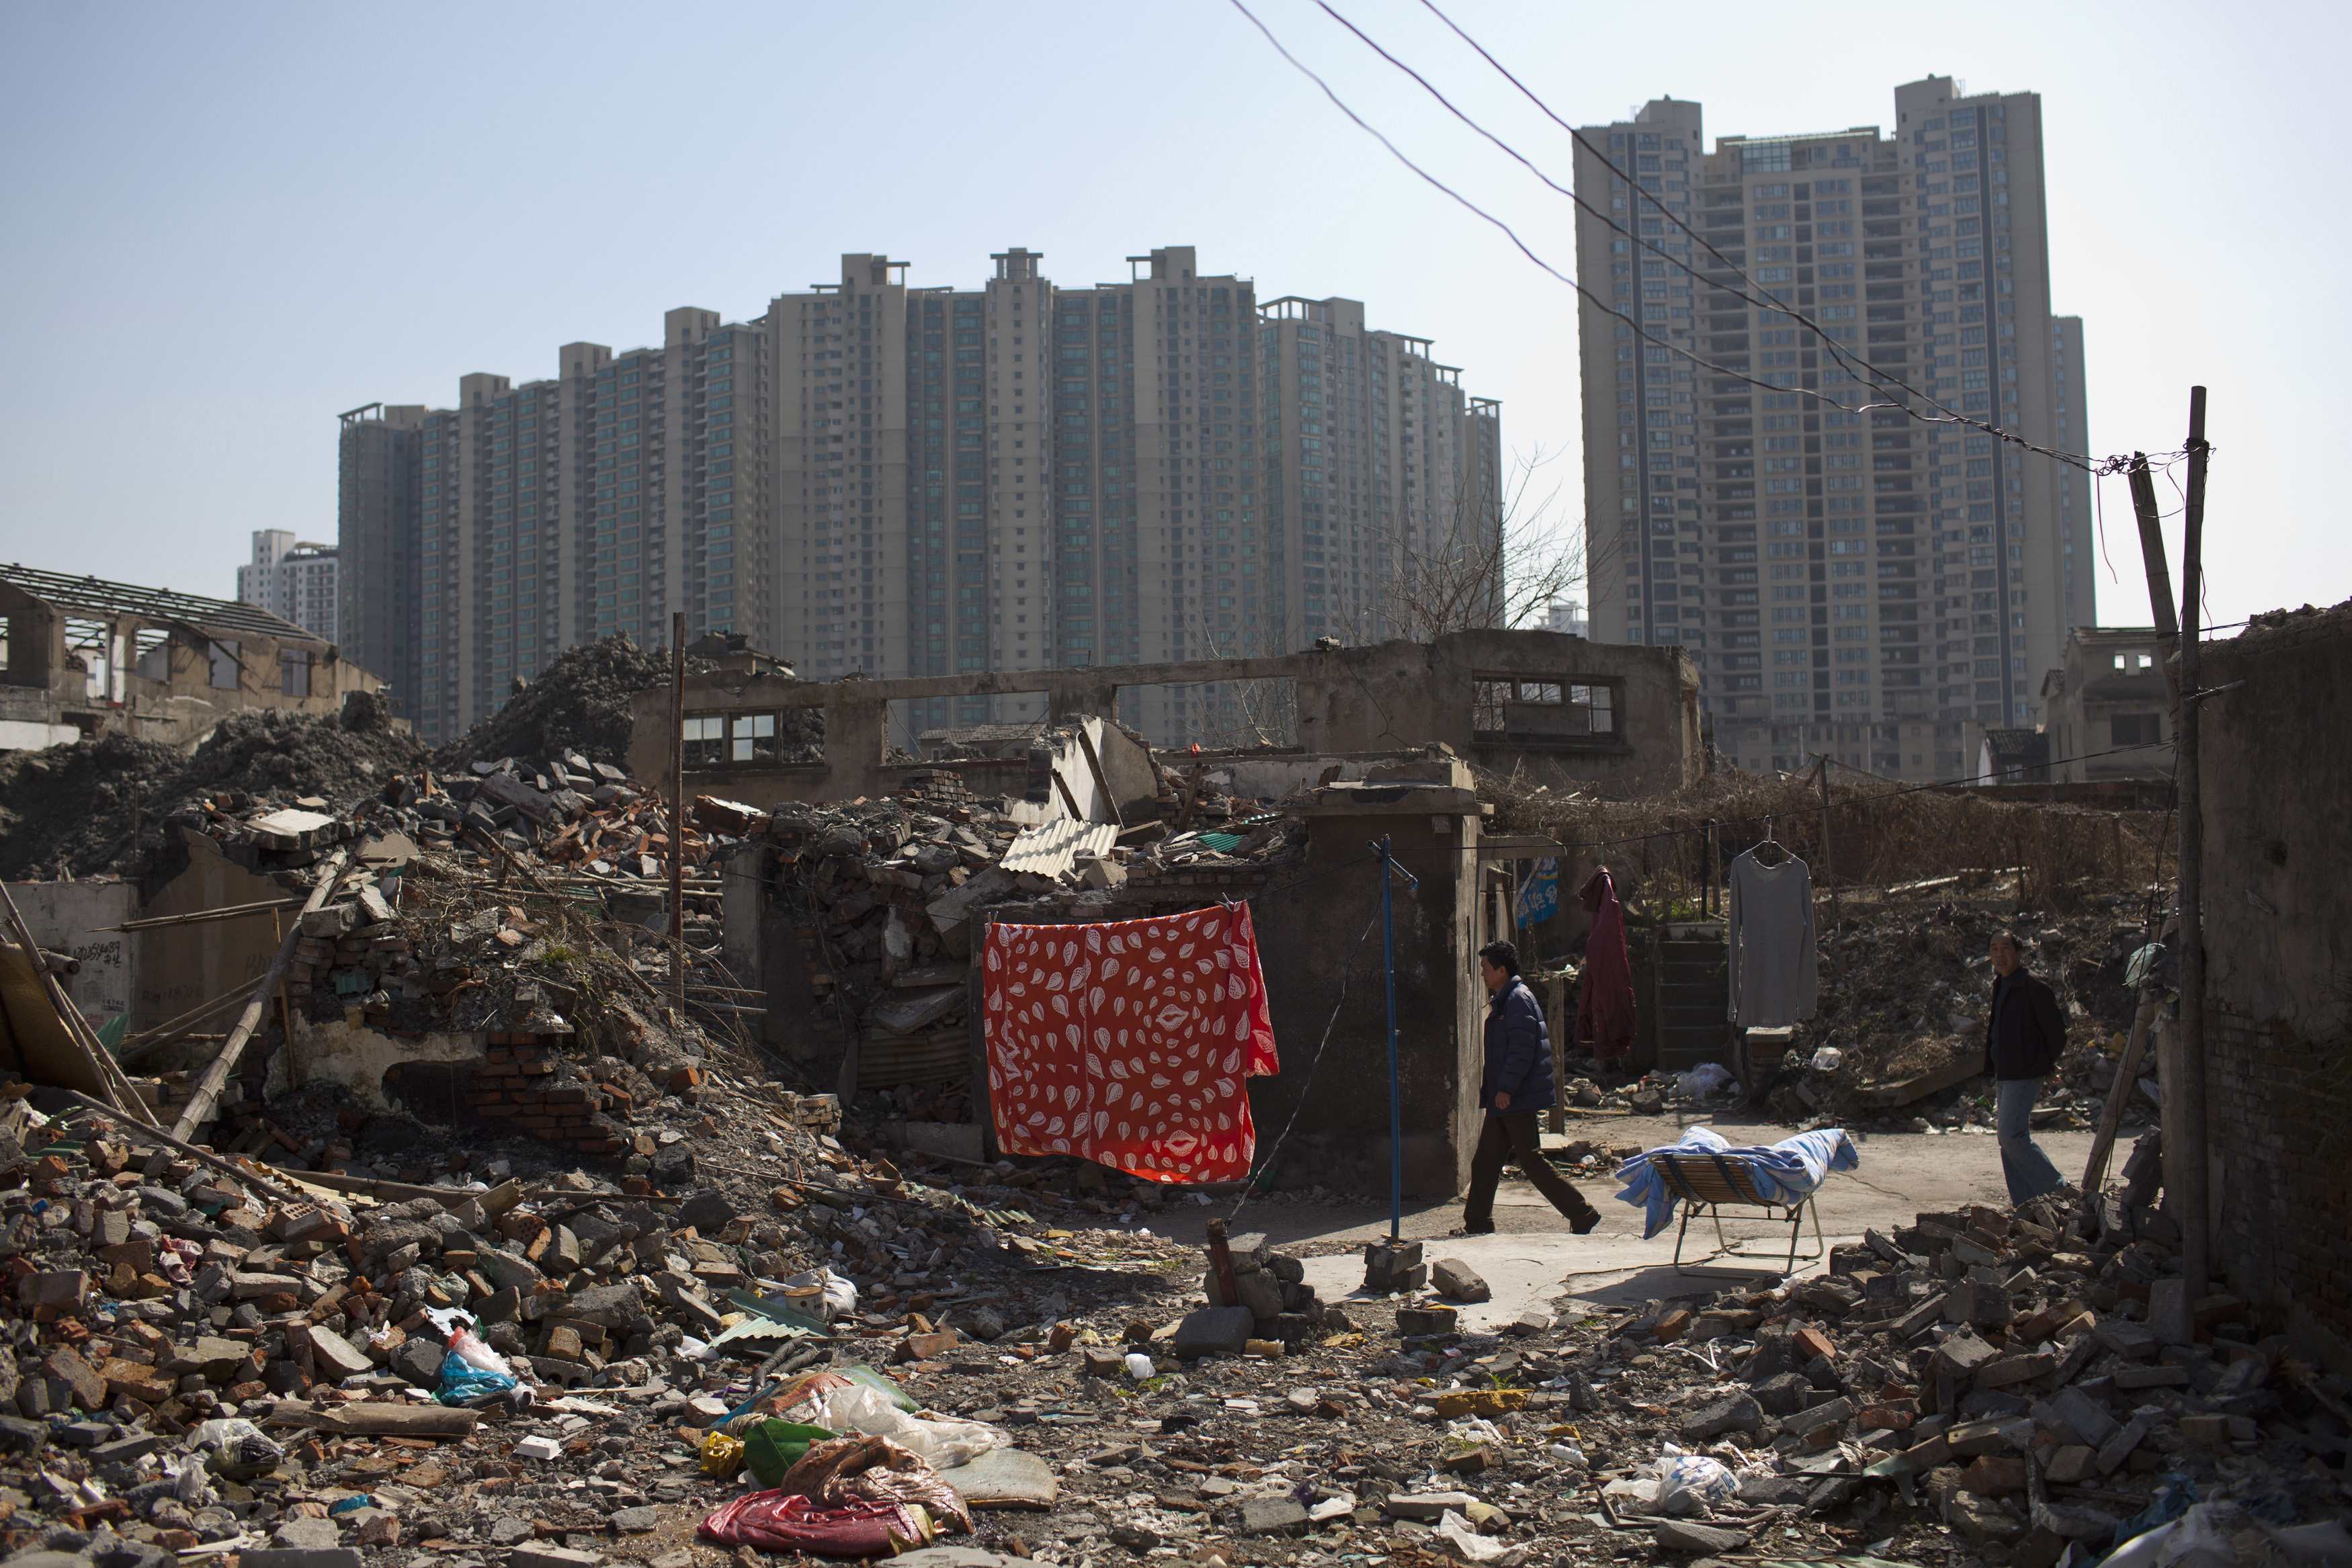 People walk in an area where residential buildings are demolished to make room for skyscrapers in Shanghai. Photo: Reuters